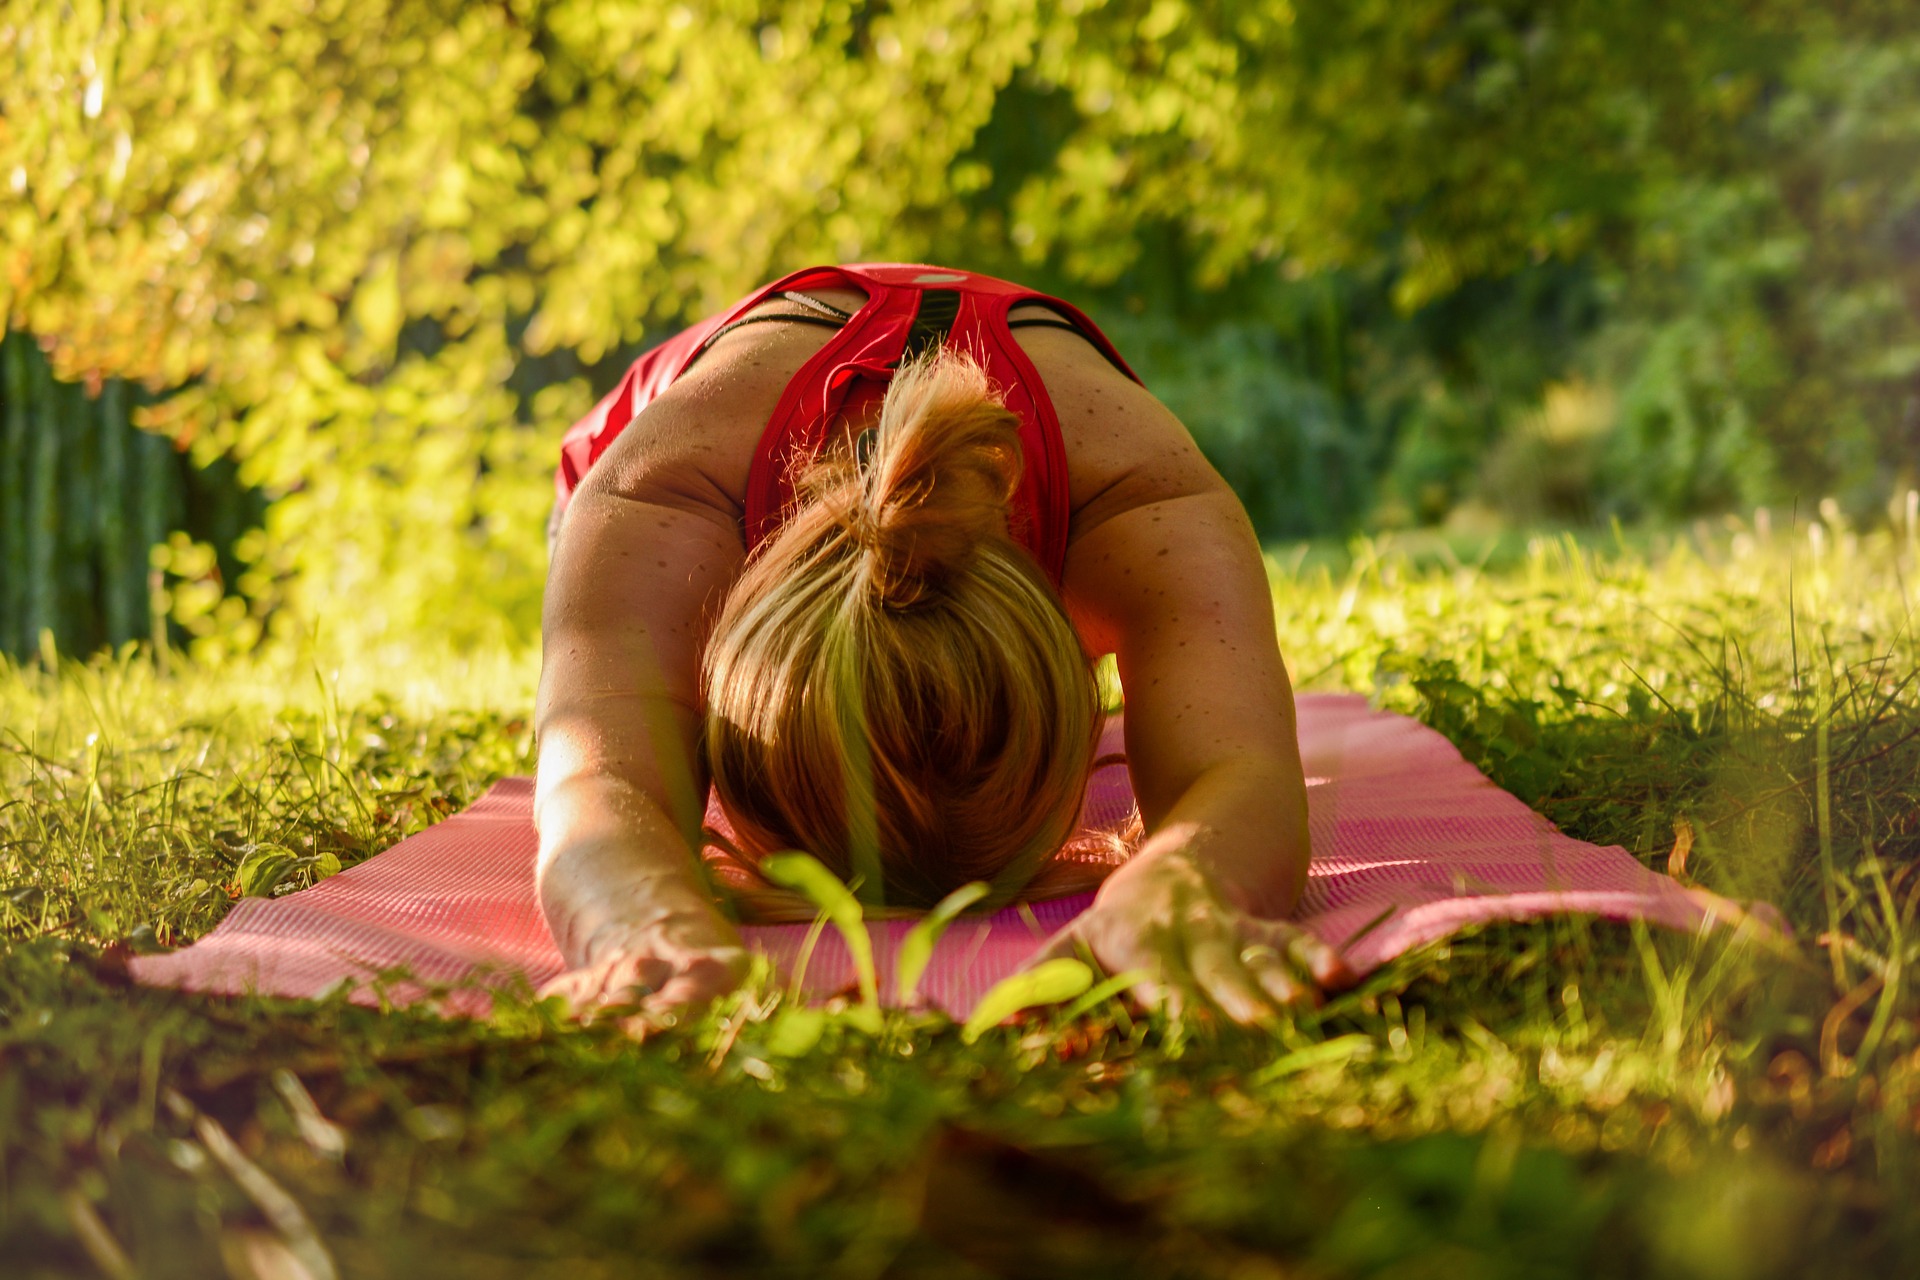 Can Yoga Stop Aging?